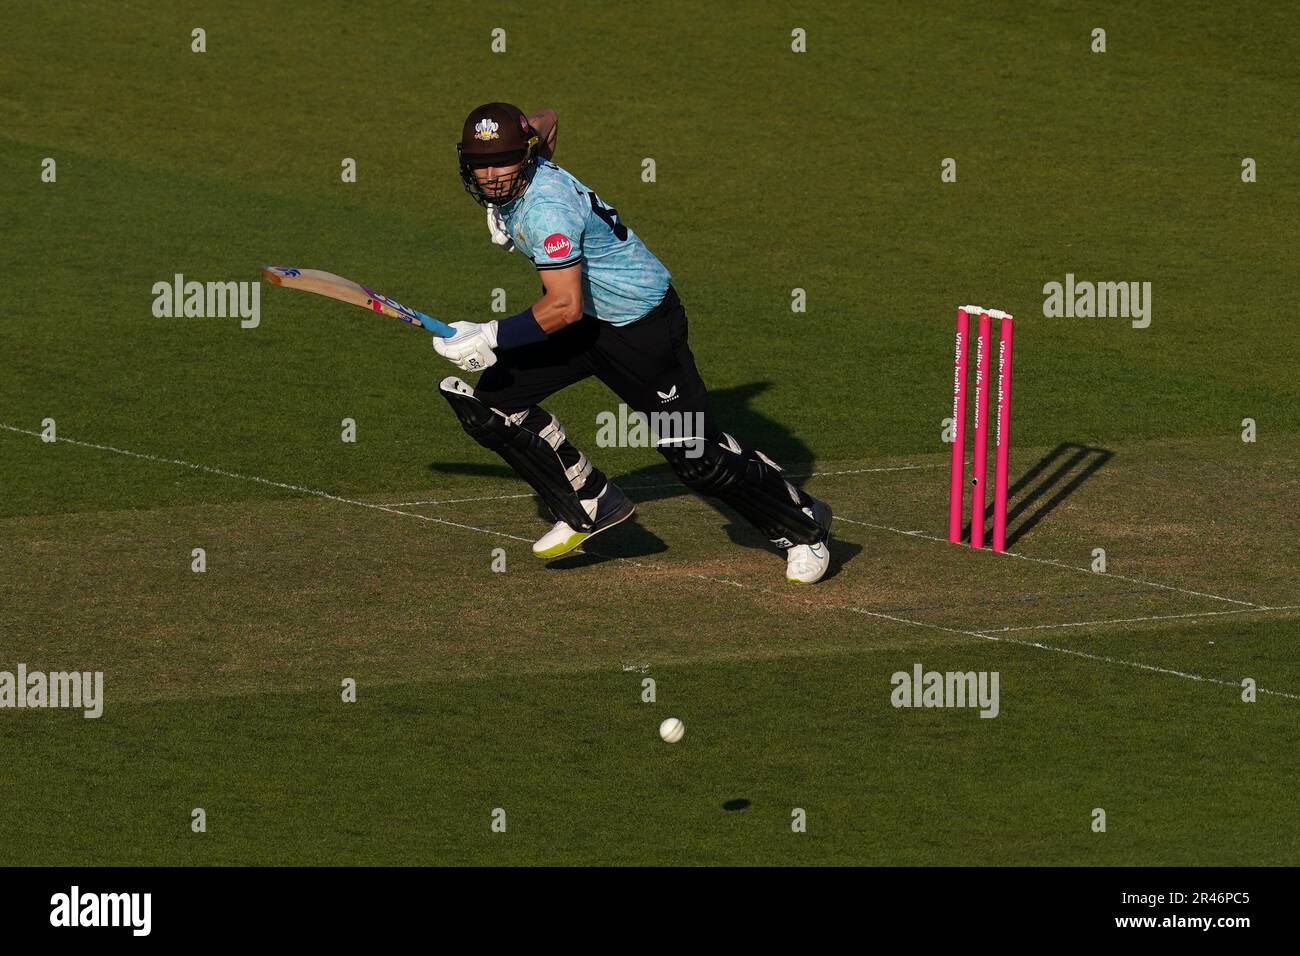 Surrey’s Tom Curran hits out on his way to a score of 16 during the Vitality Blast T20 match at the Kia Oval, London Picture date: Friday May 26, 2022. Stock Photo